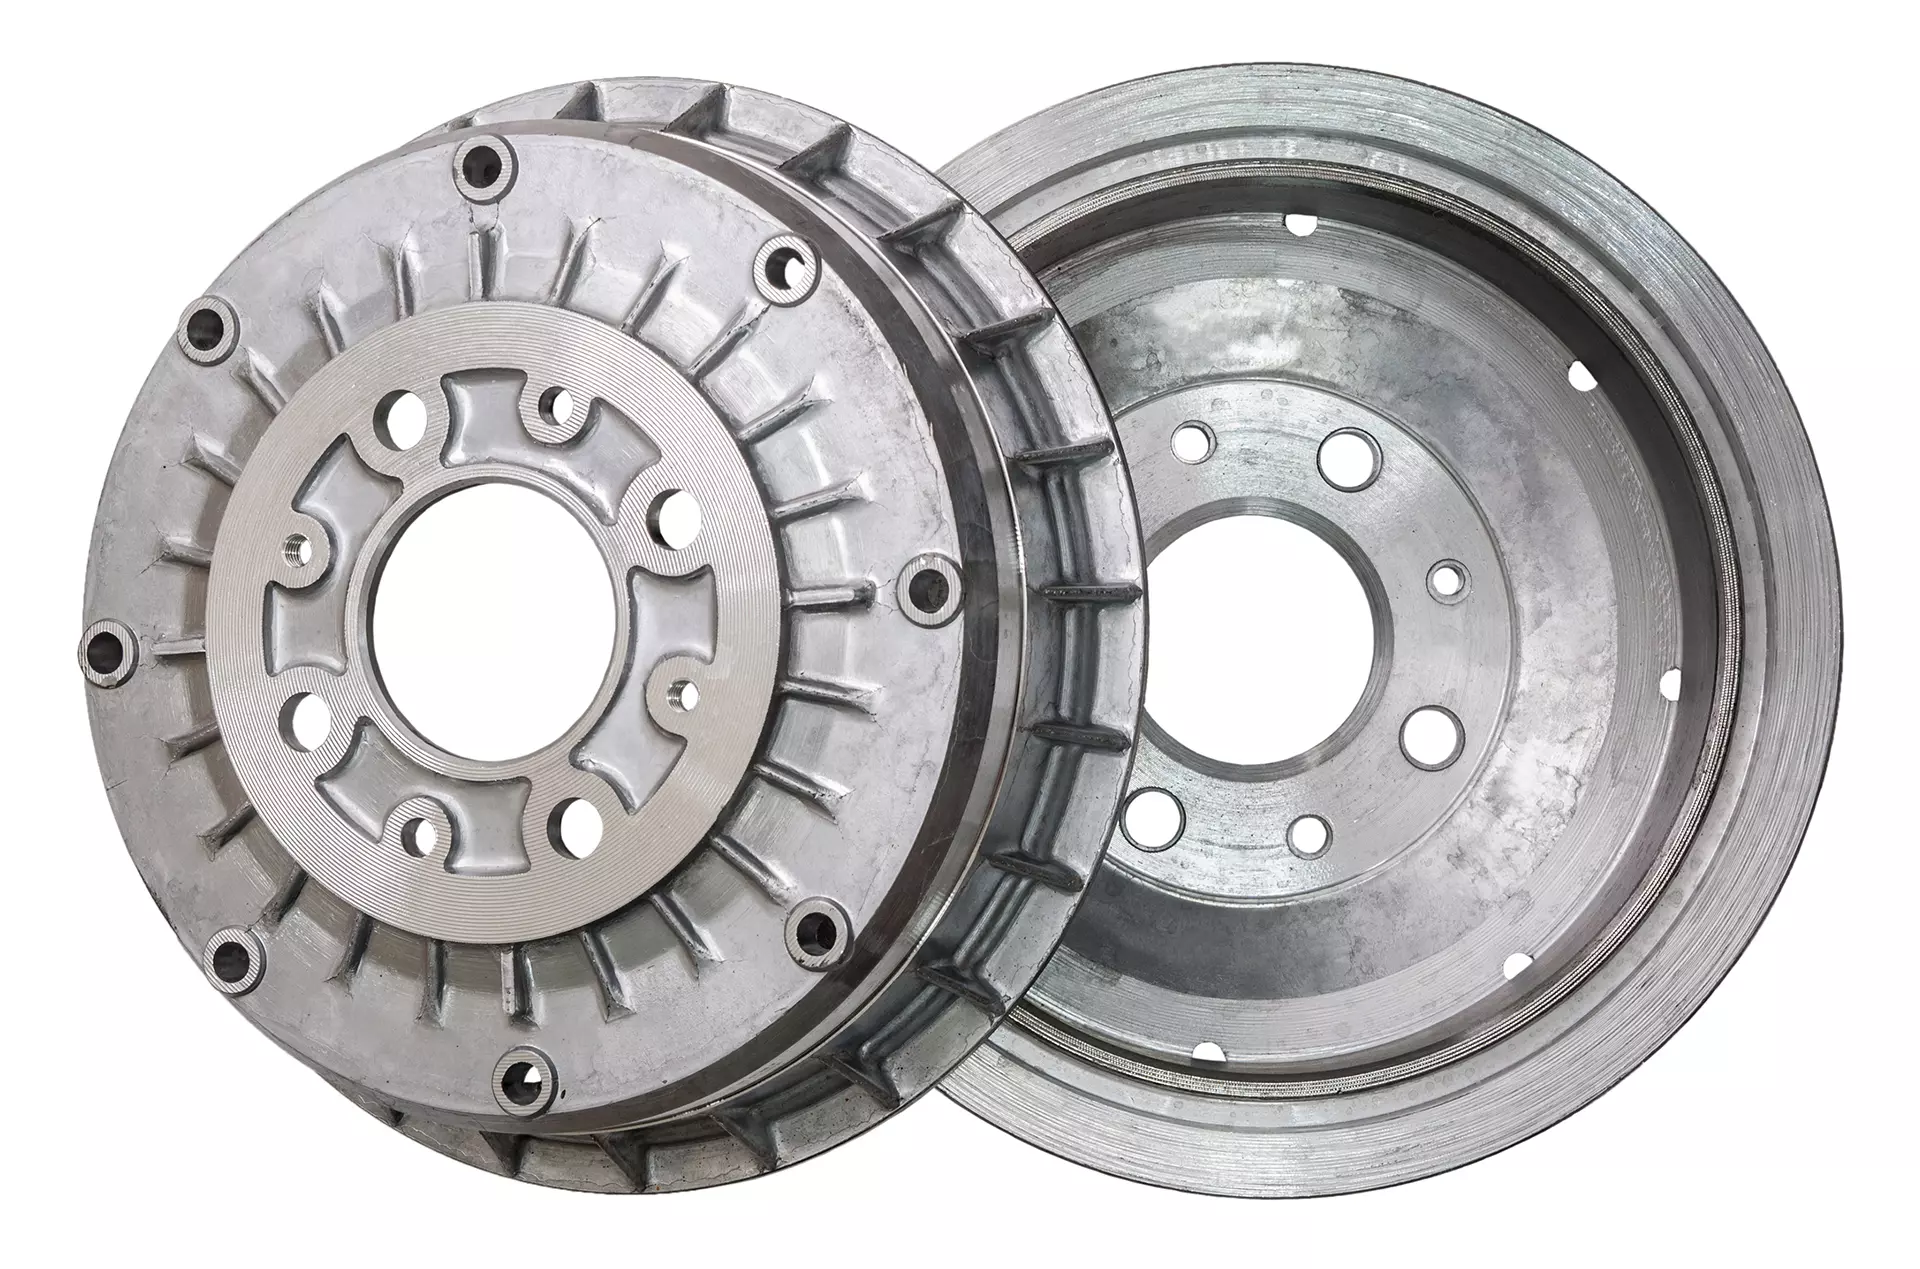 What Are Drum Brakes and How Do They Work